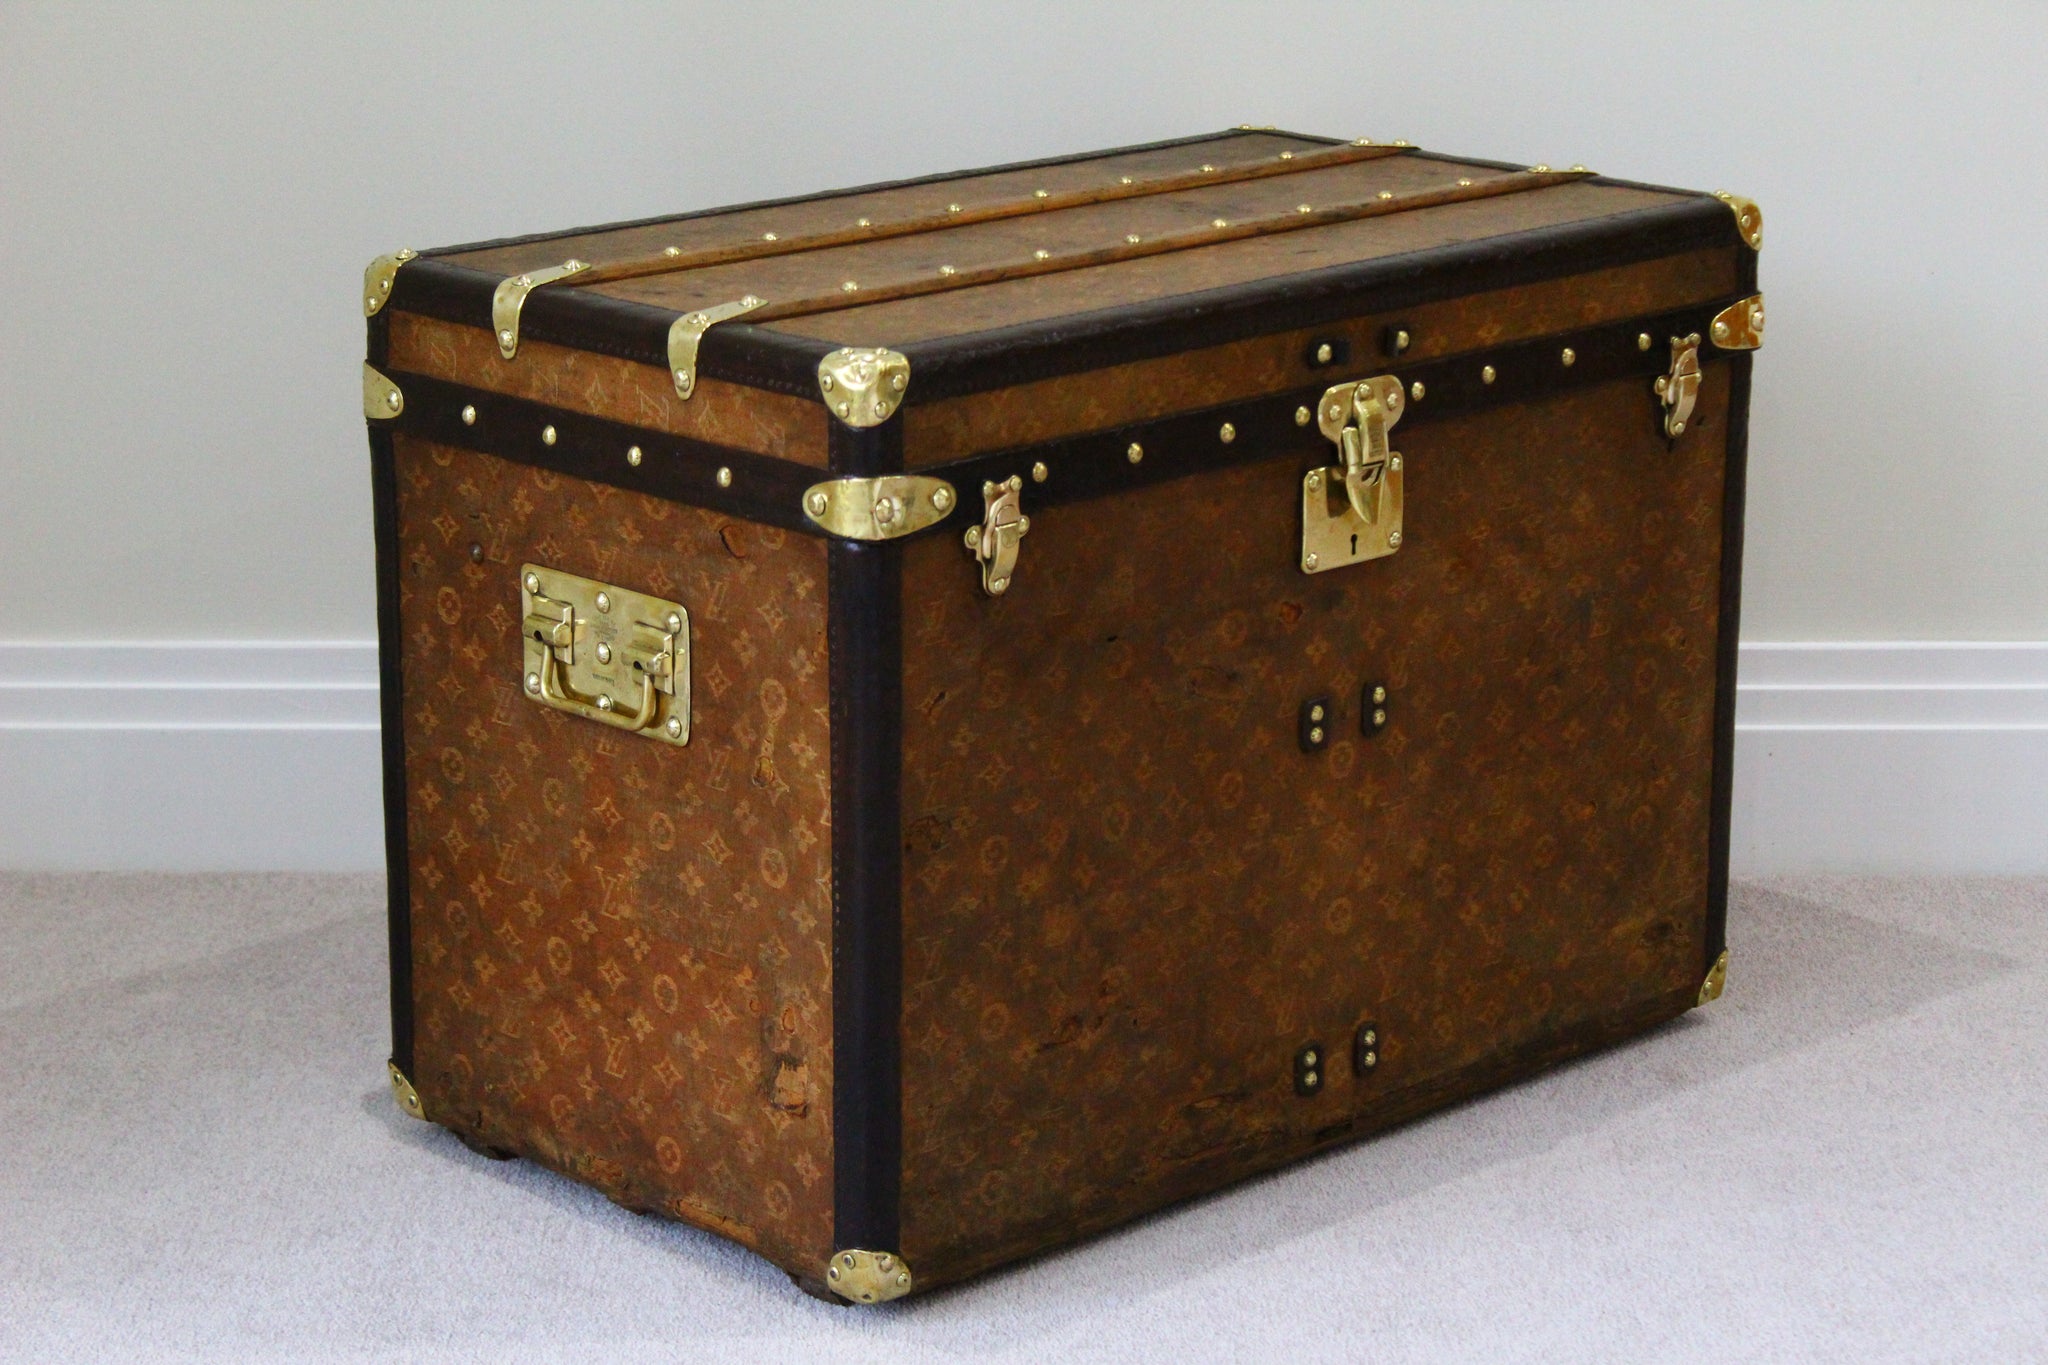 Hat Trunk in Woven Canvas from Louis Vuitton, Paris, 1900s